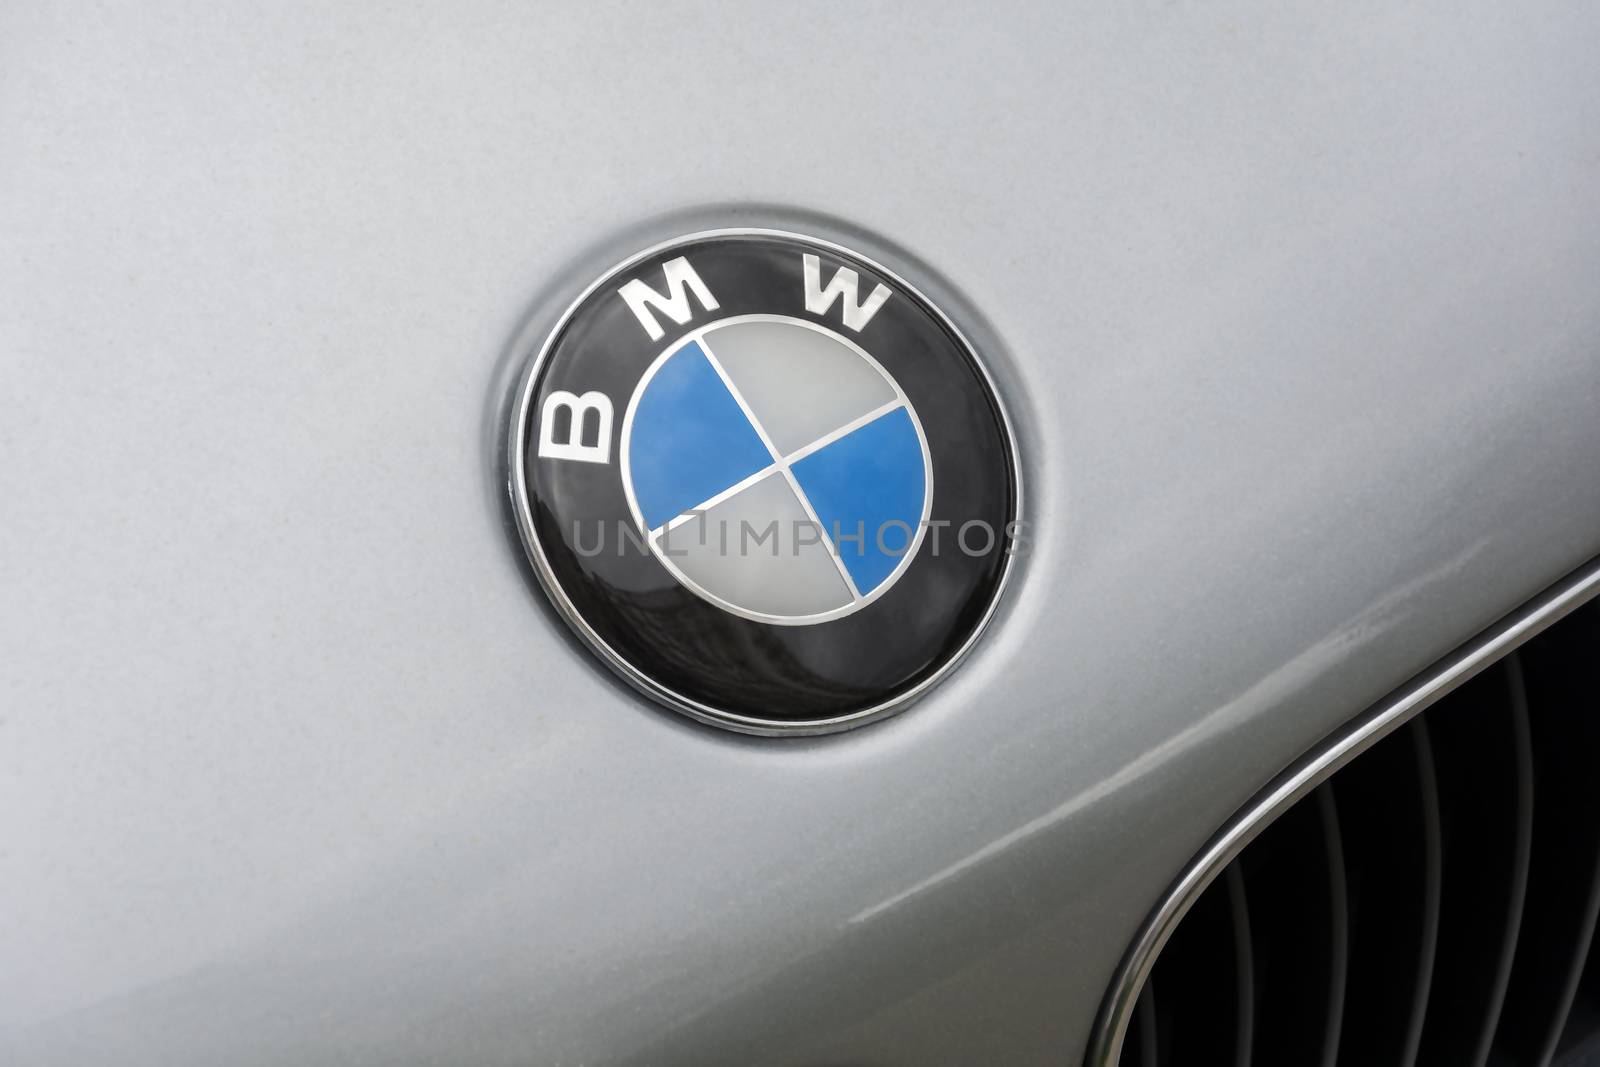 Germany, Berlin - May 26, 2017: the logo of the German automotive company BMW on the bonnet of the car